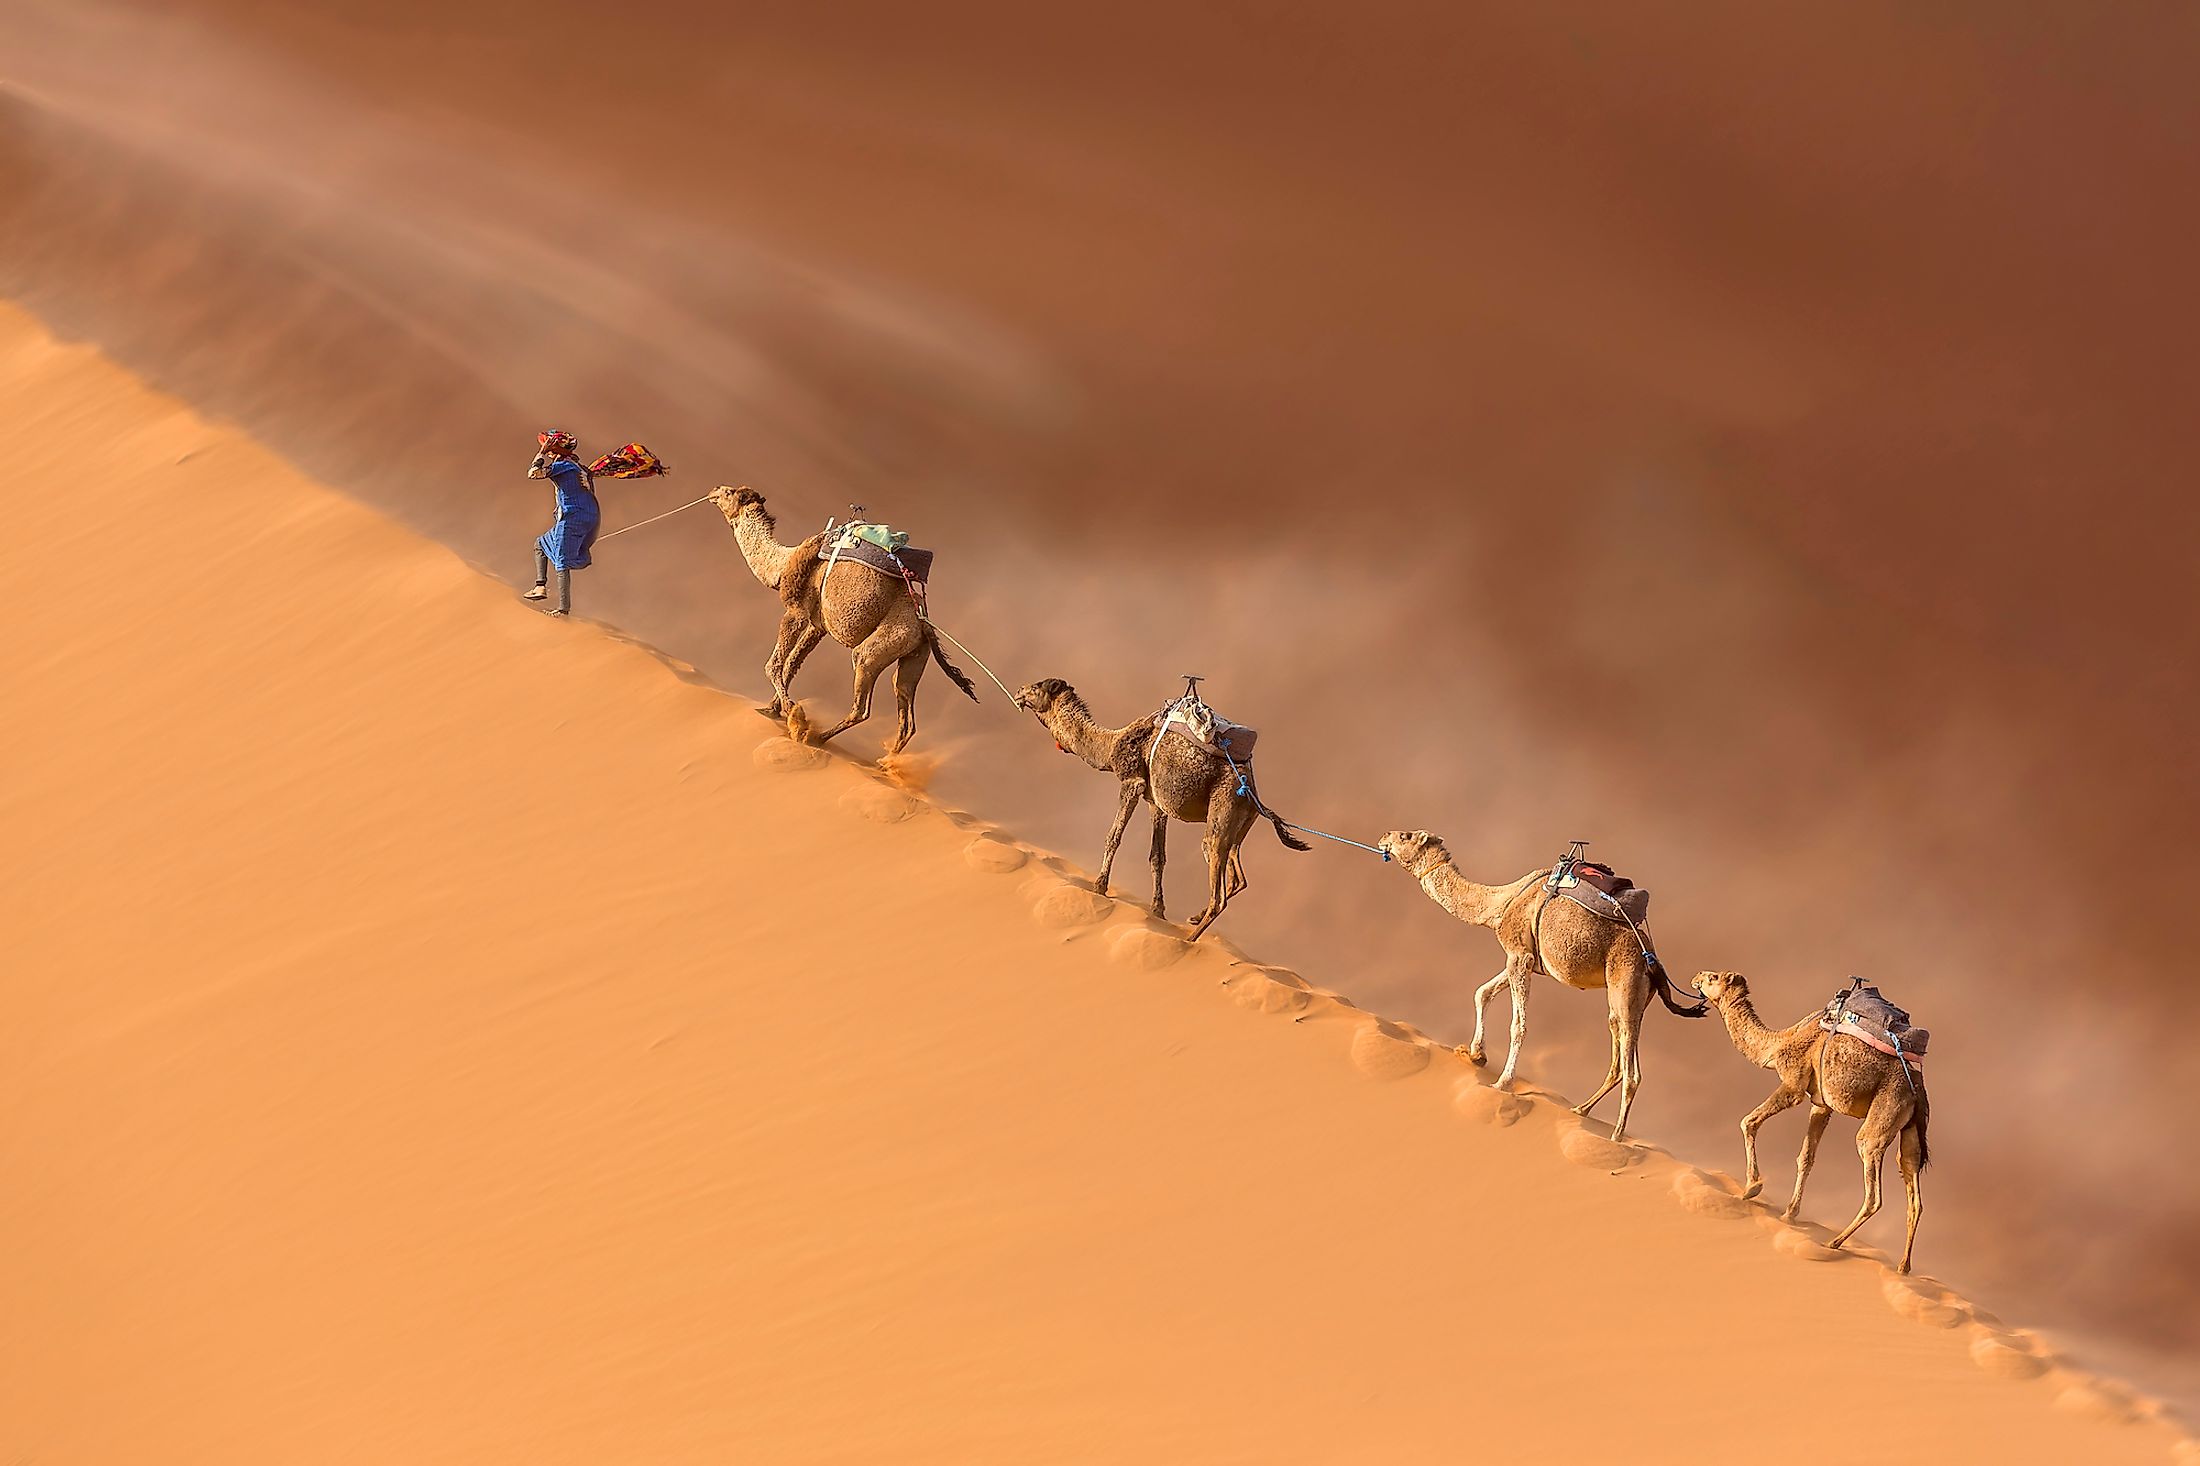 where is the nubian desert located in africa